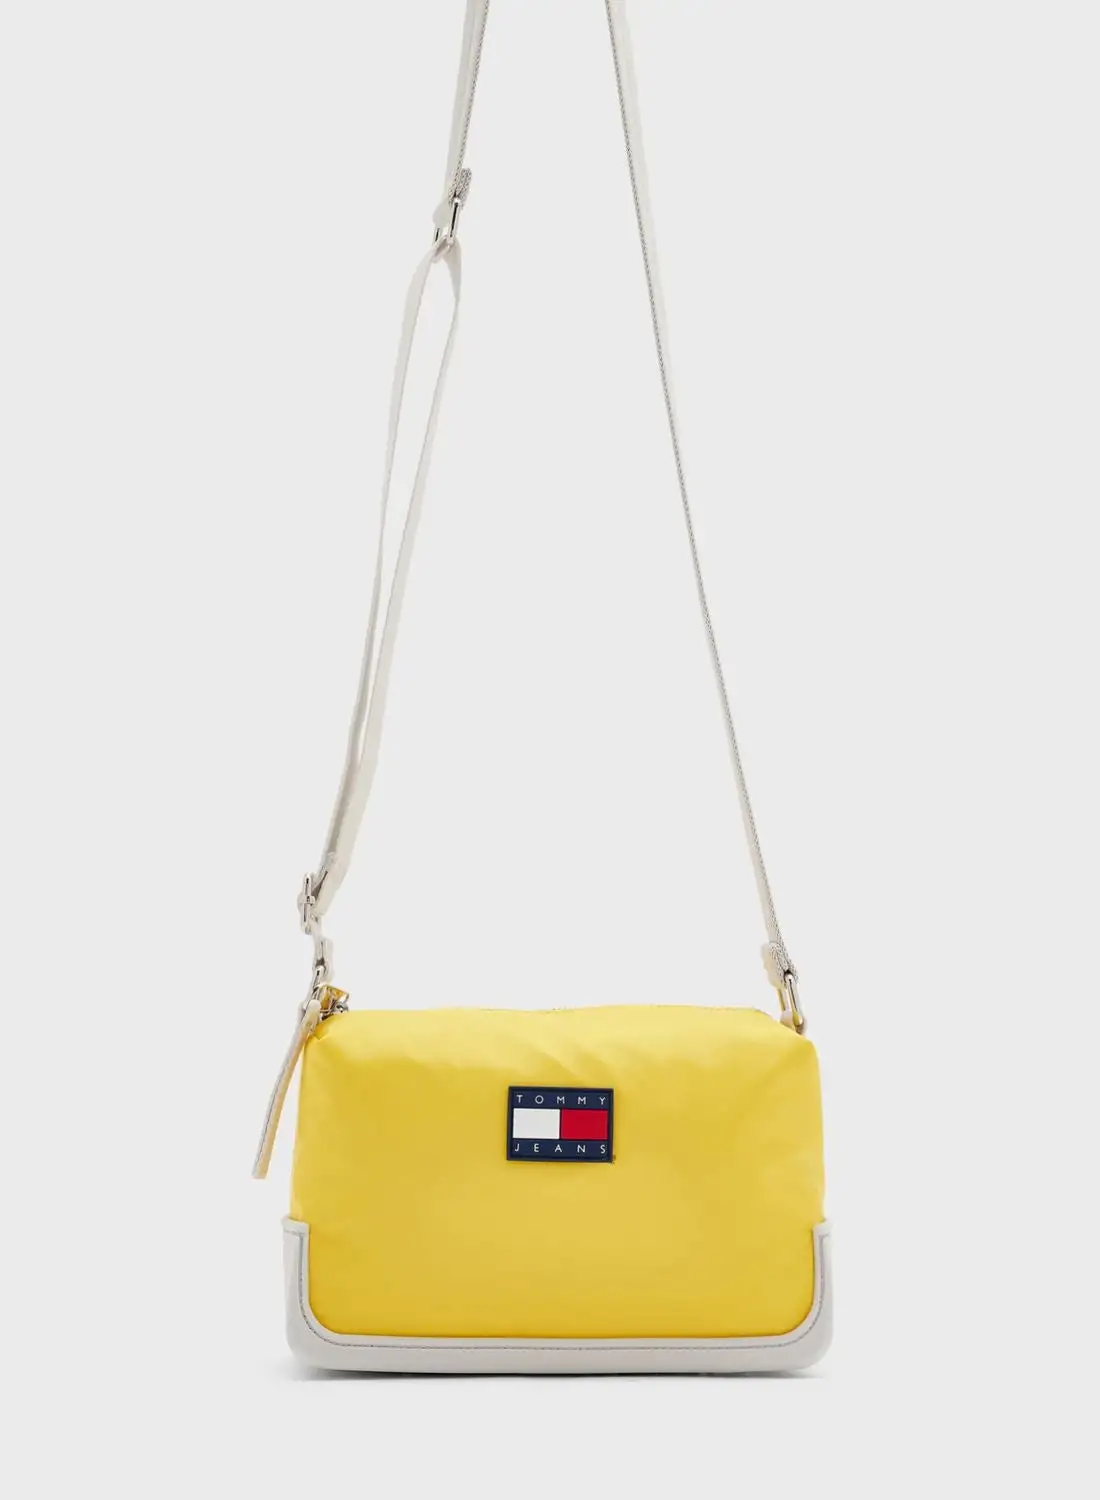 TOMMY HILFIGER Uncovered Clutch